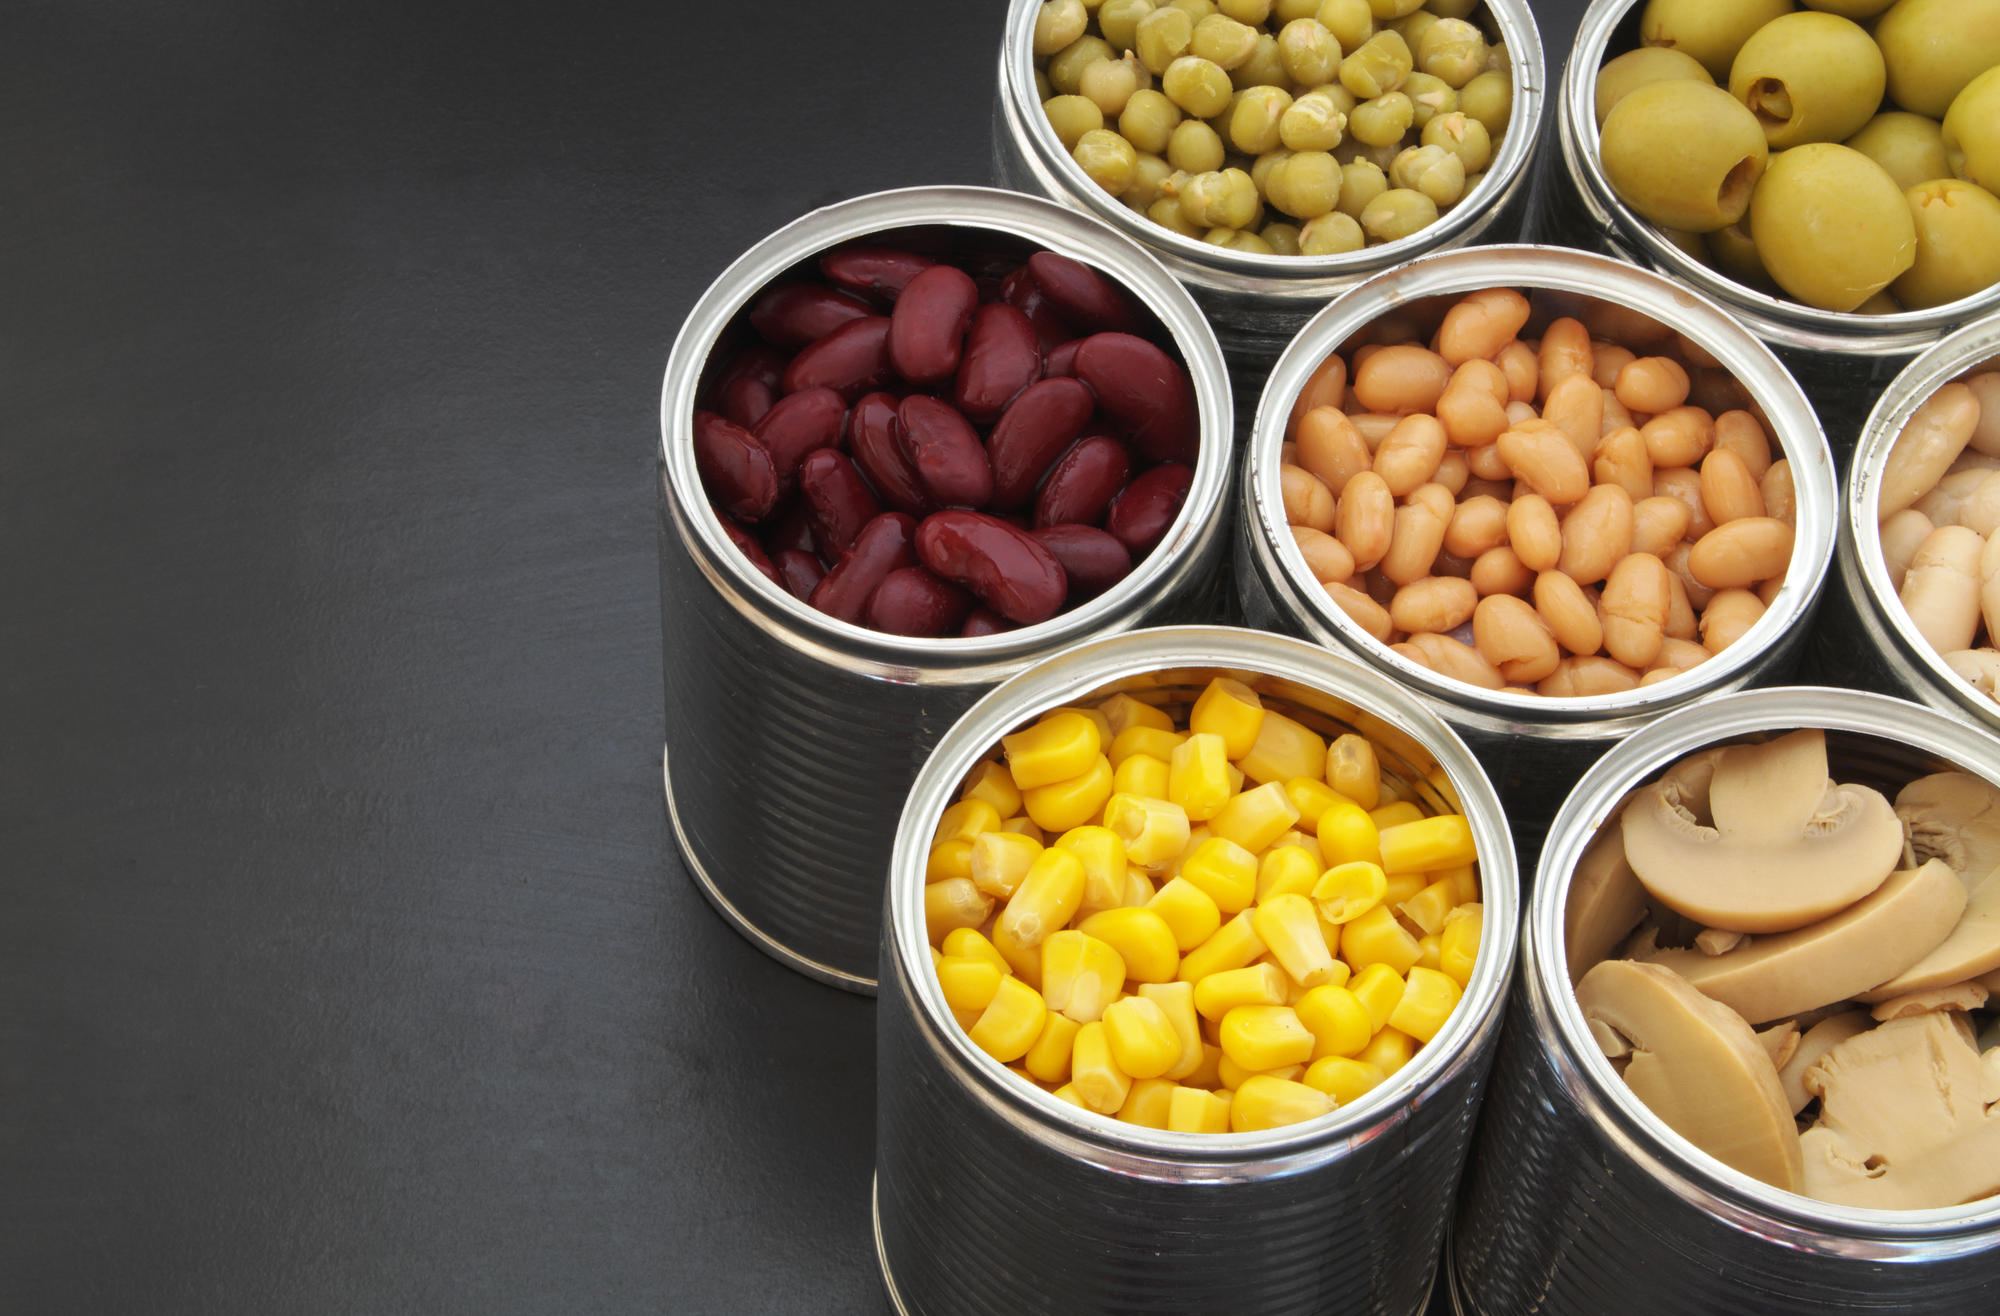 Metal cans of corn, beans, olives, mushrooms, and peas.